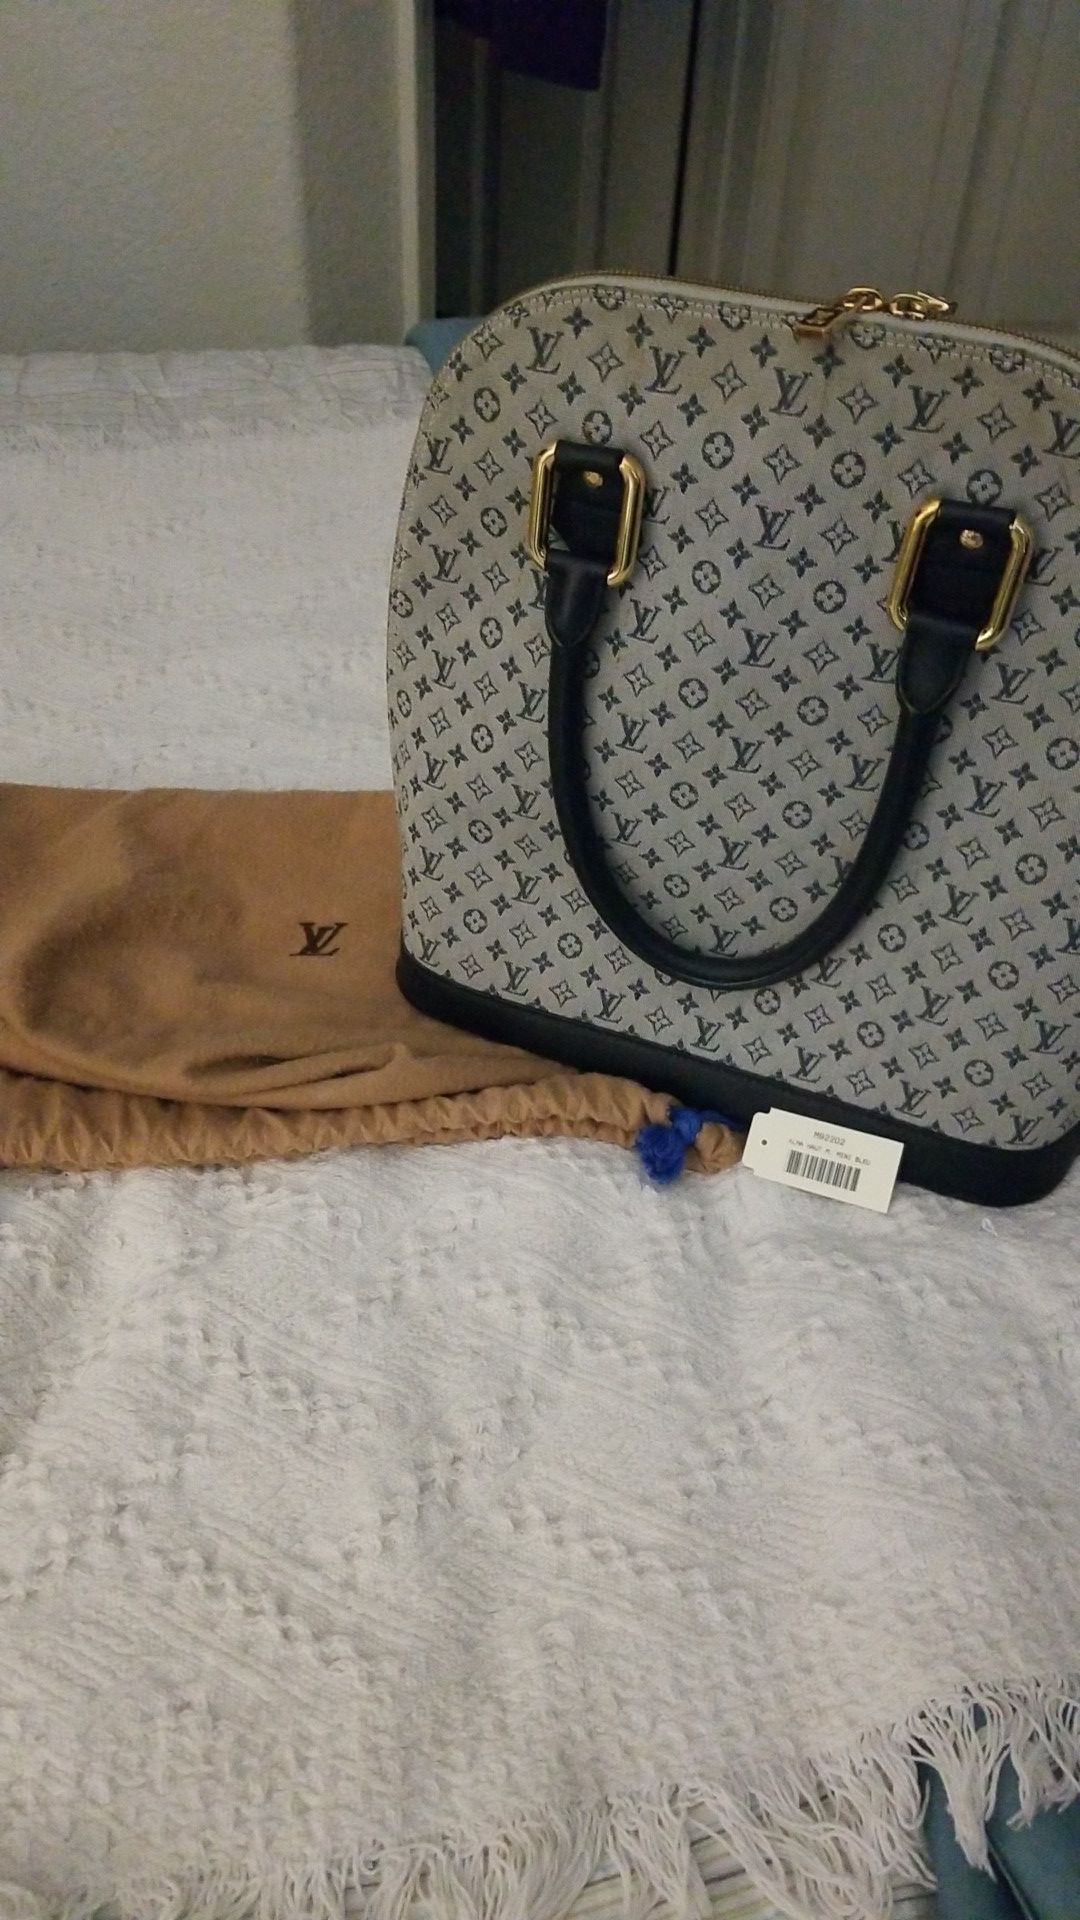 Louis Vuitton - Travel Set - authentic And Original for Sale in Las Vegas,  NV - OfferUp